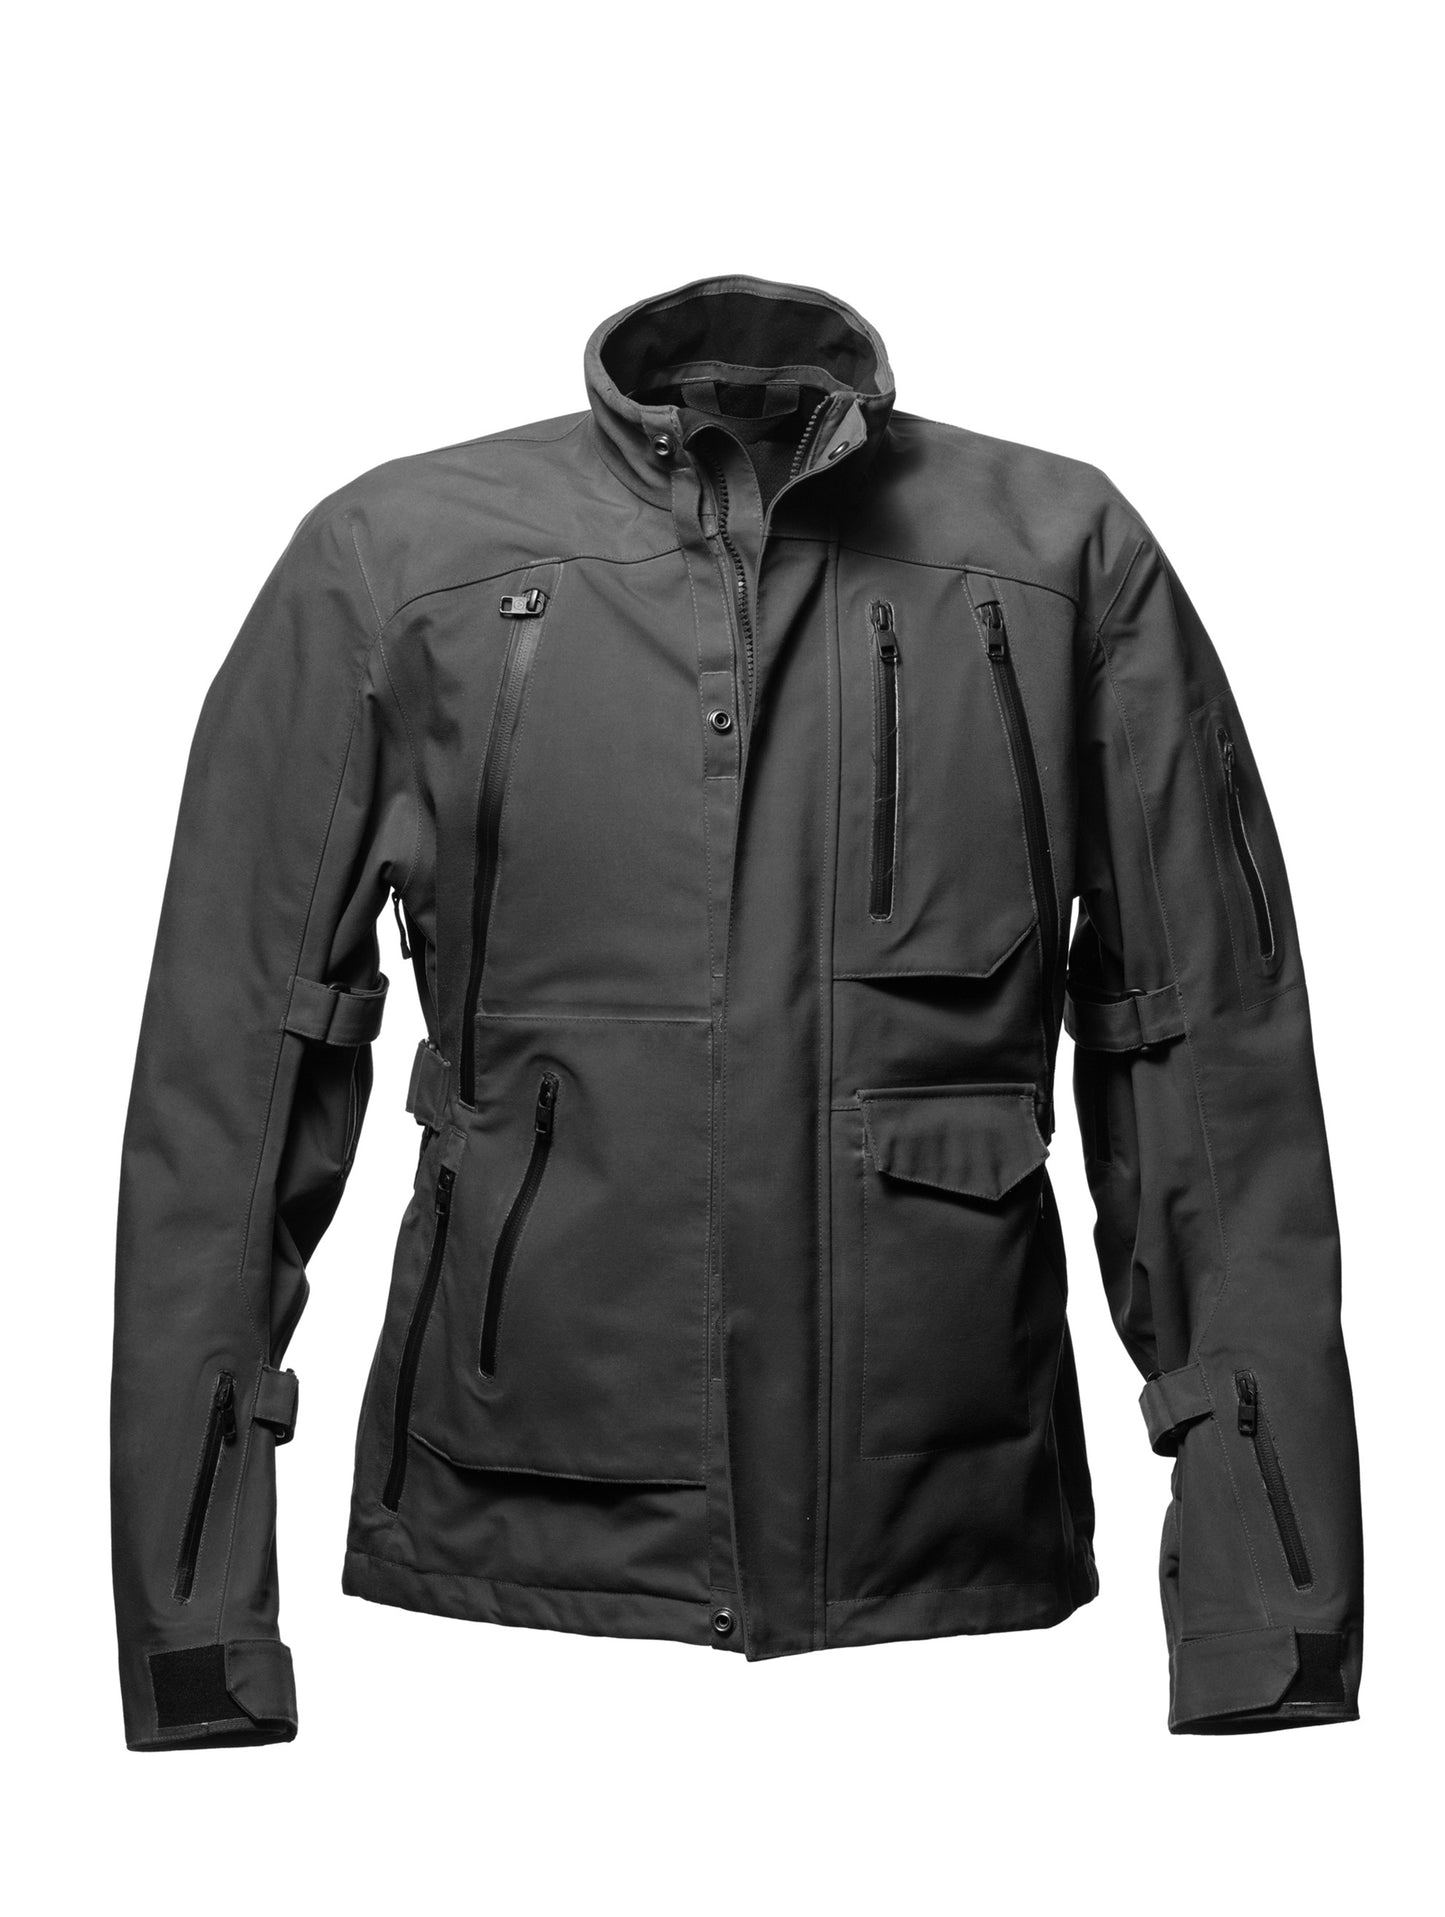 Expedition Motorcycle Jacket - Graphite